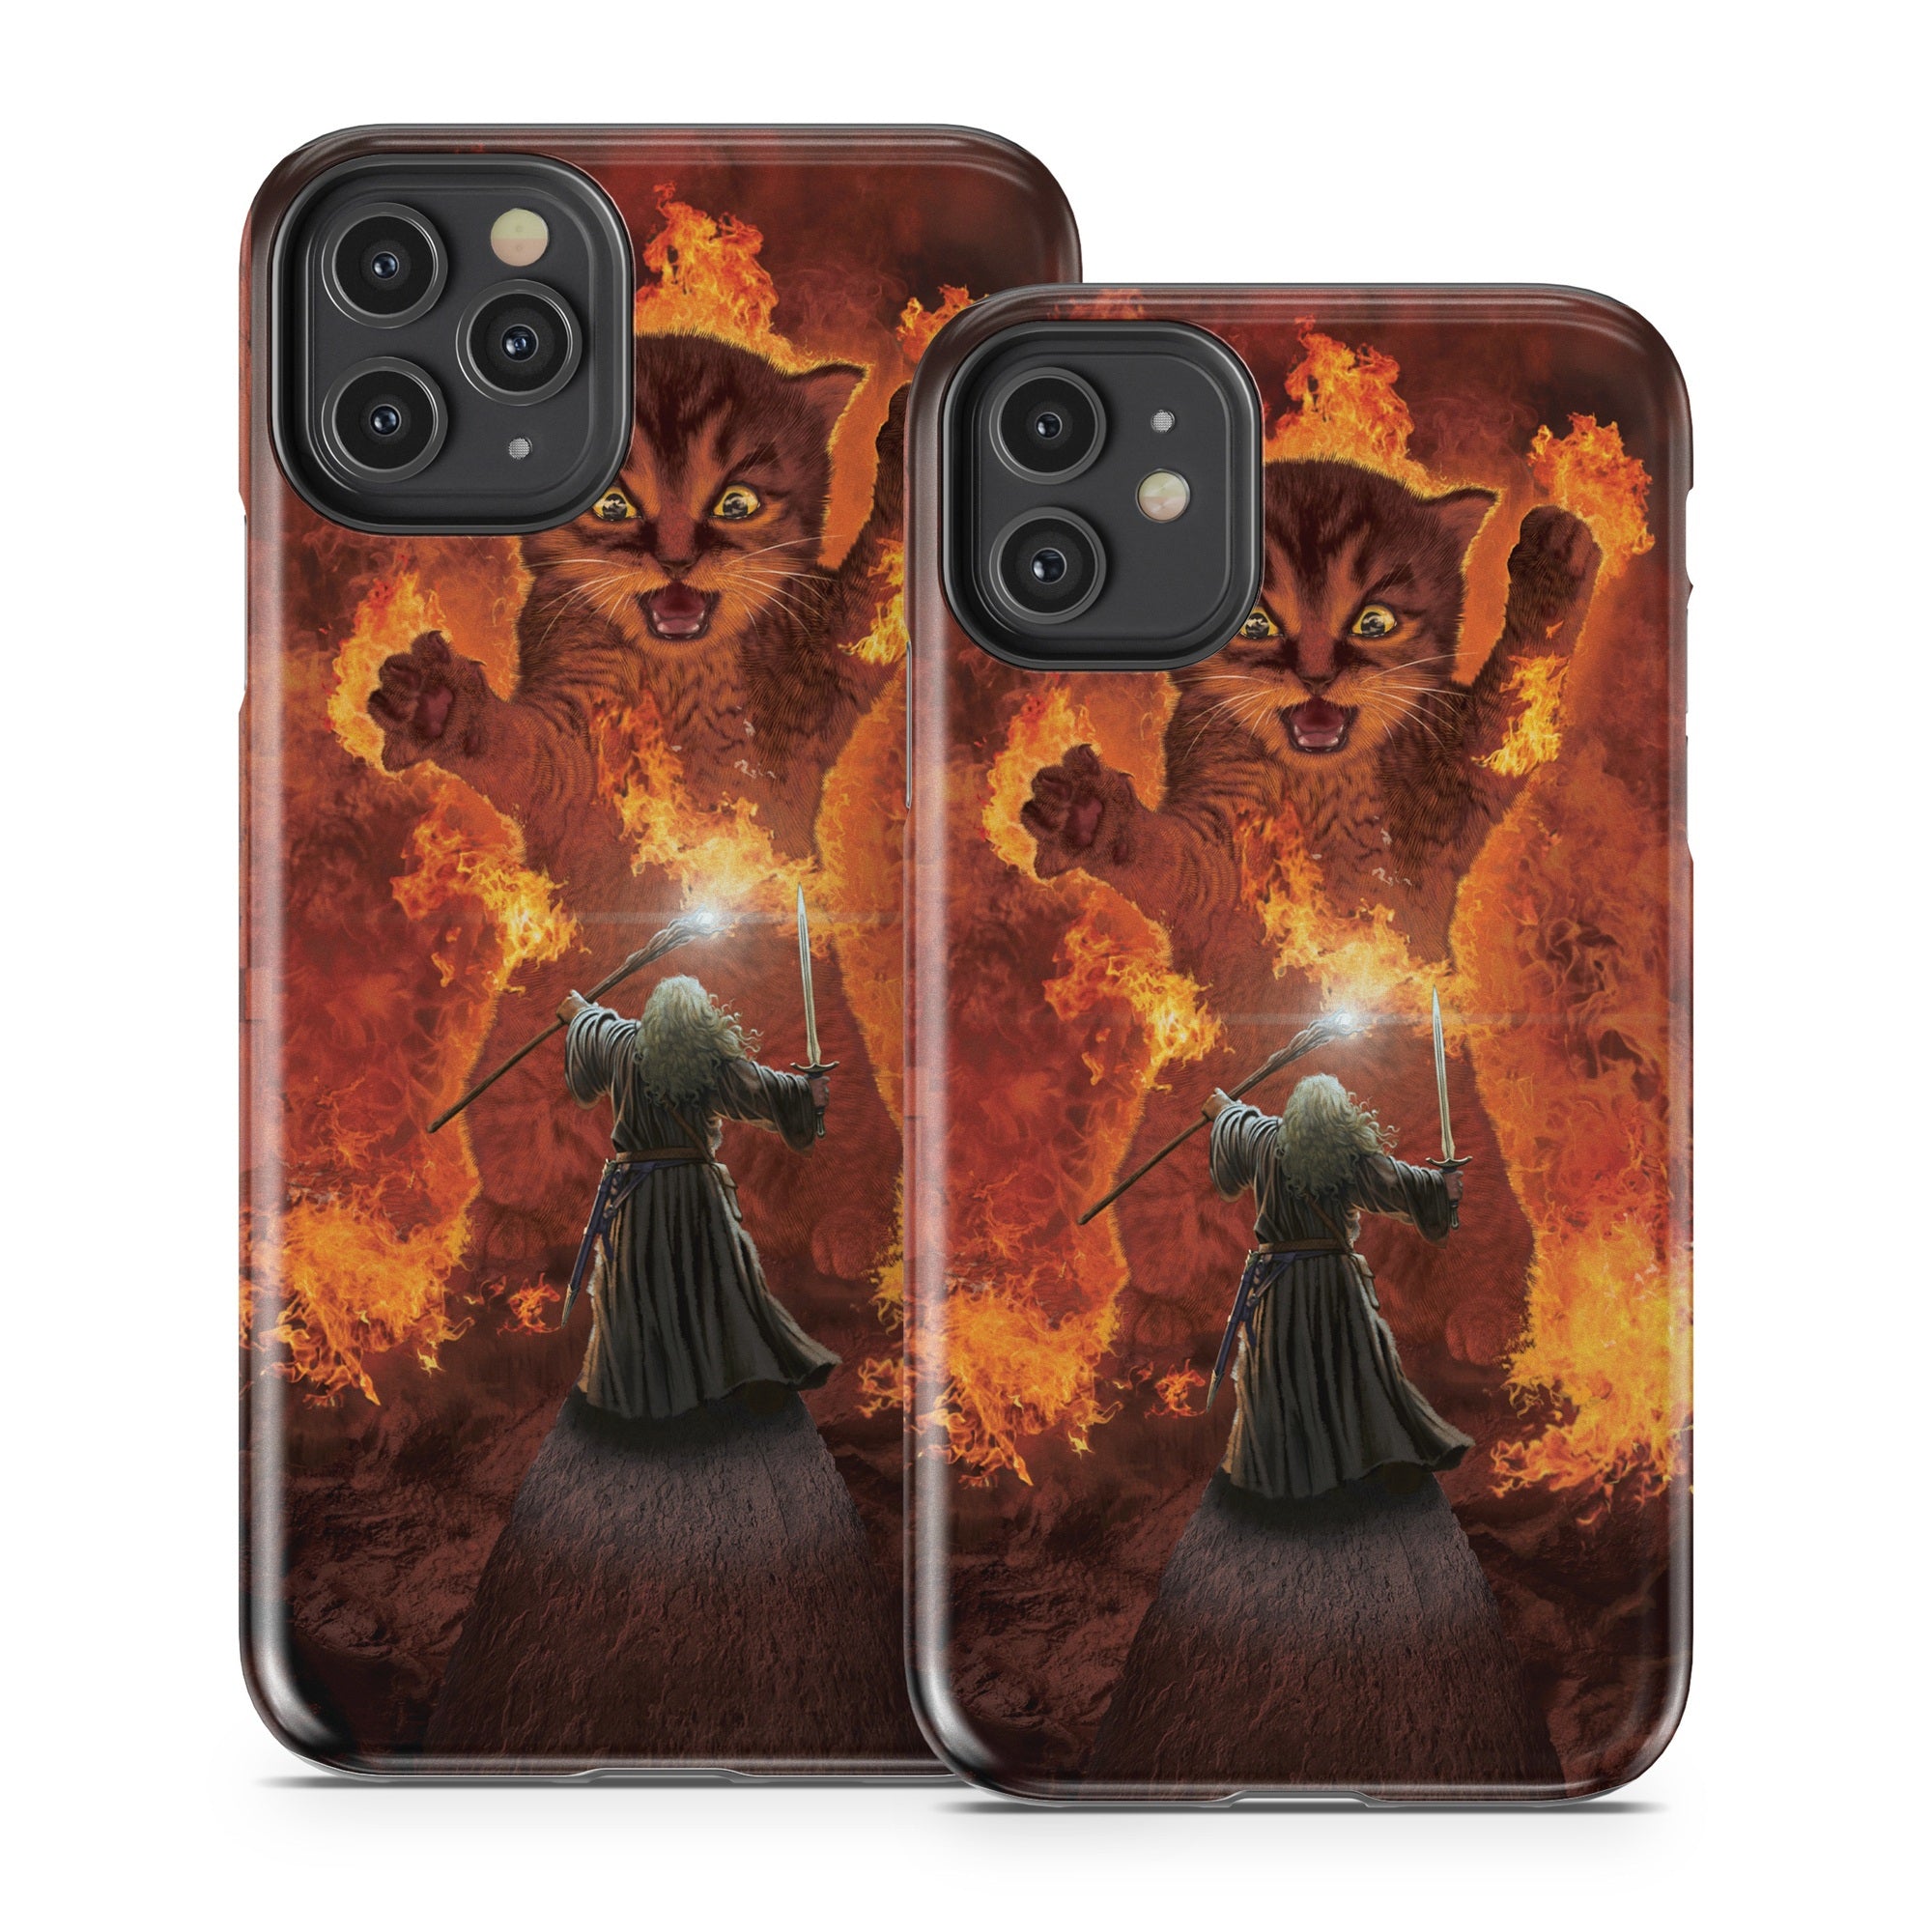 You Shall Not Pass - Apple iPhone 11 Tough Case